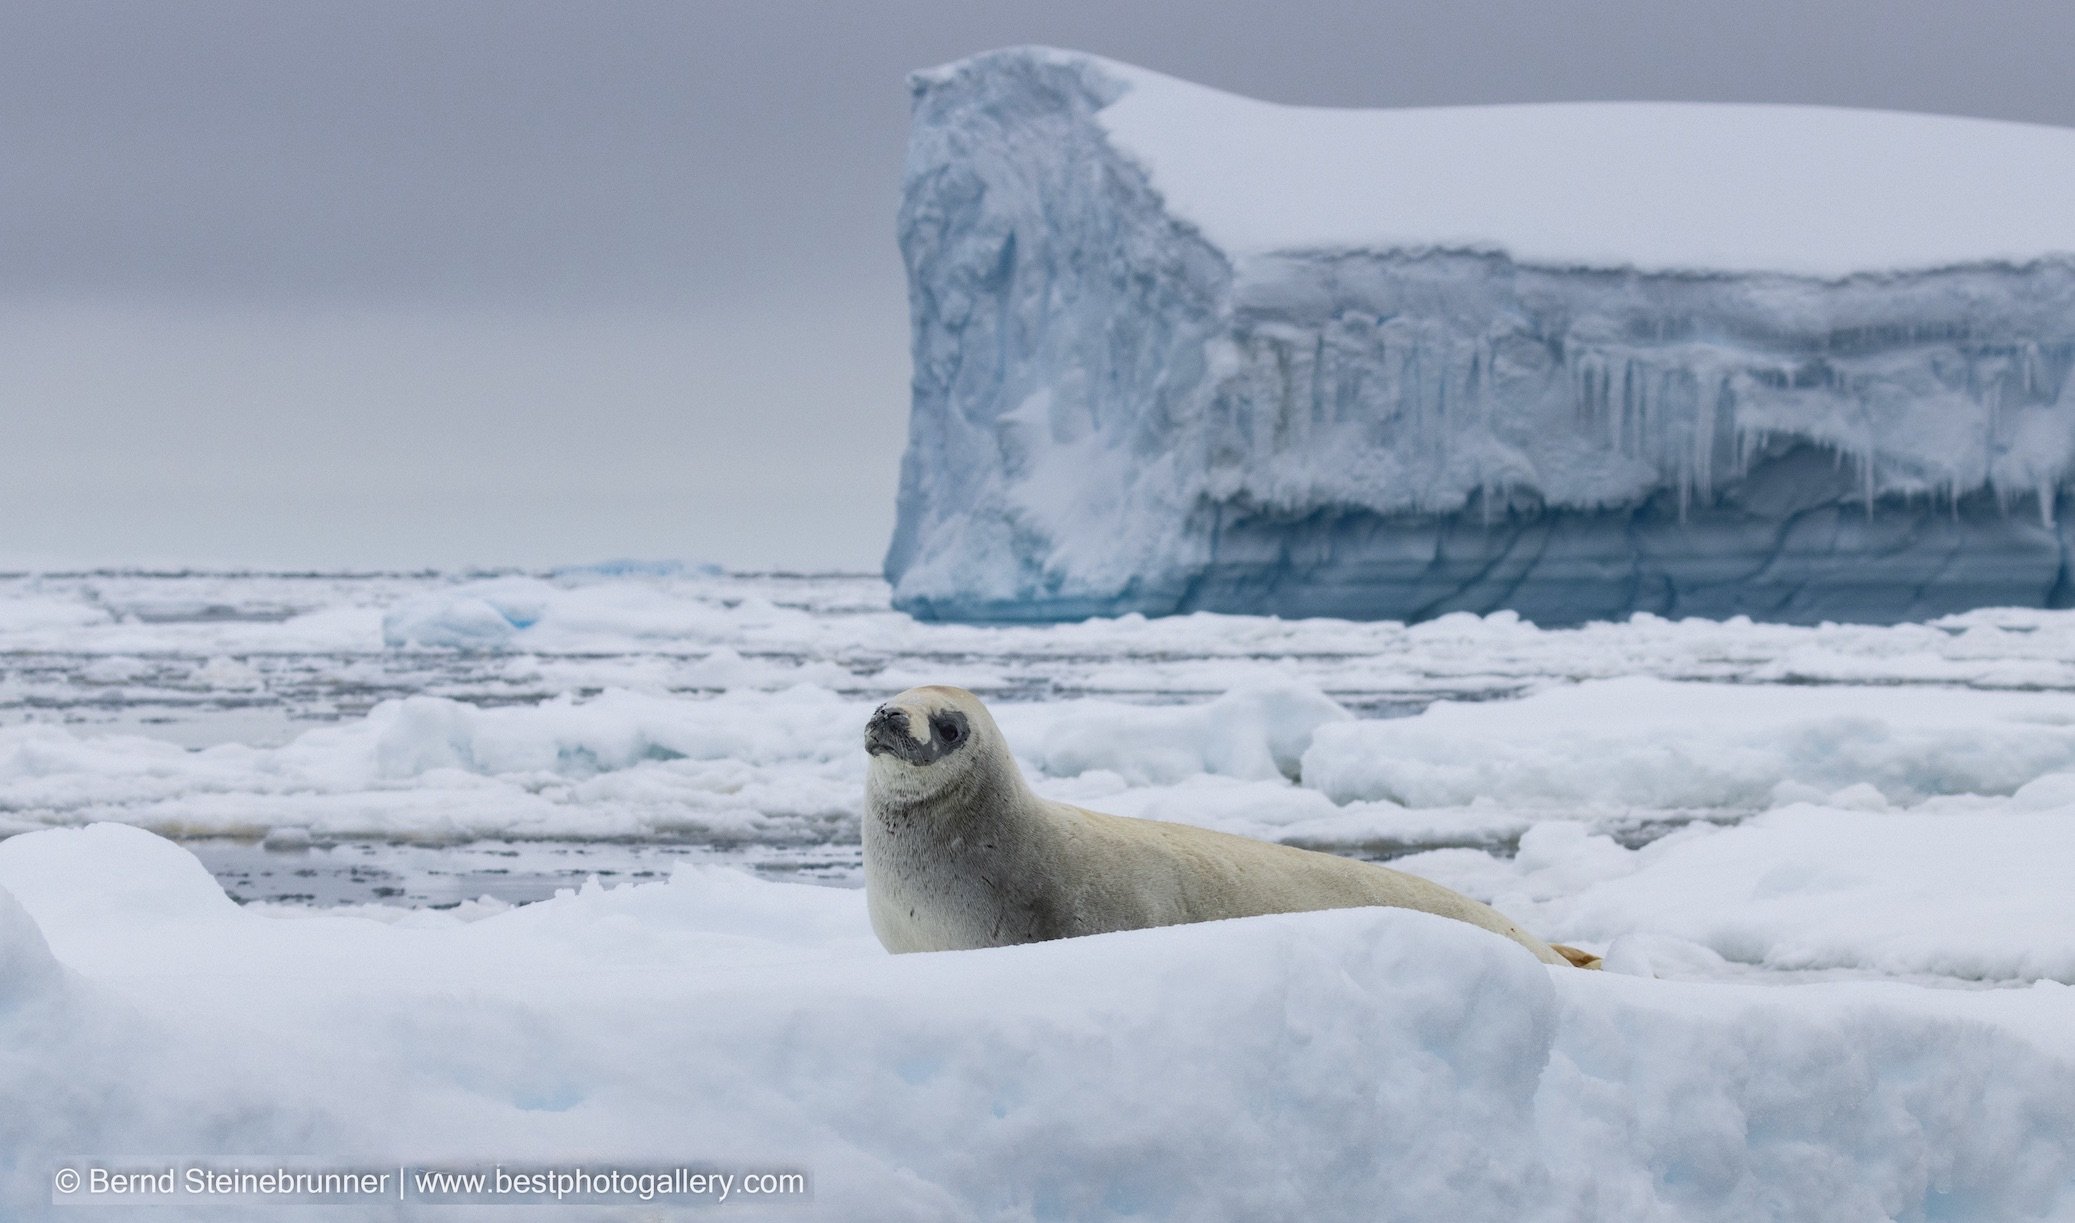 Weddell Seal rests on an iceberg